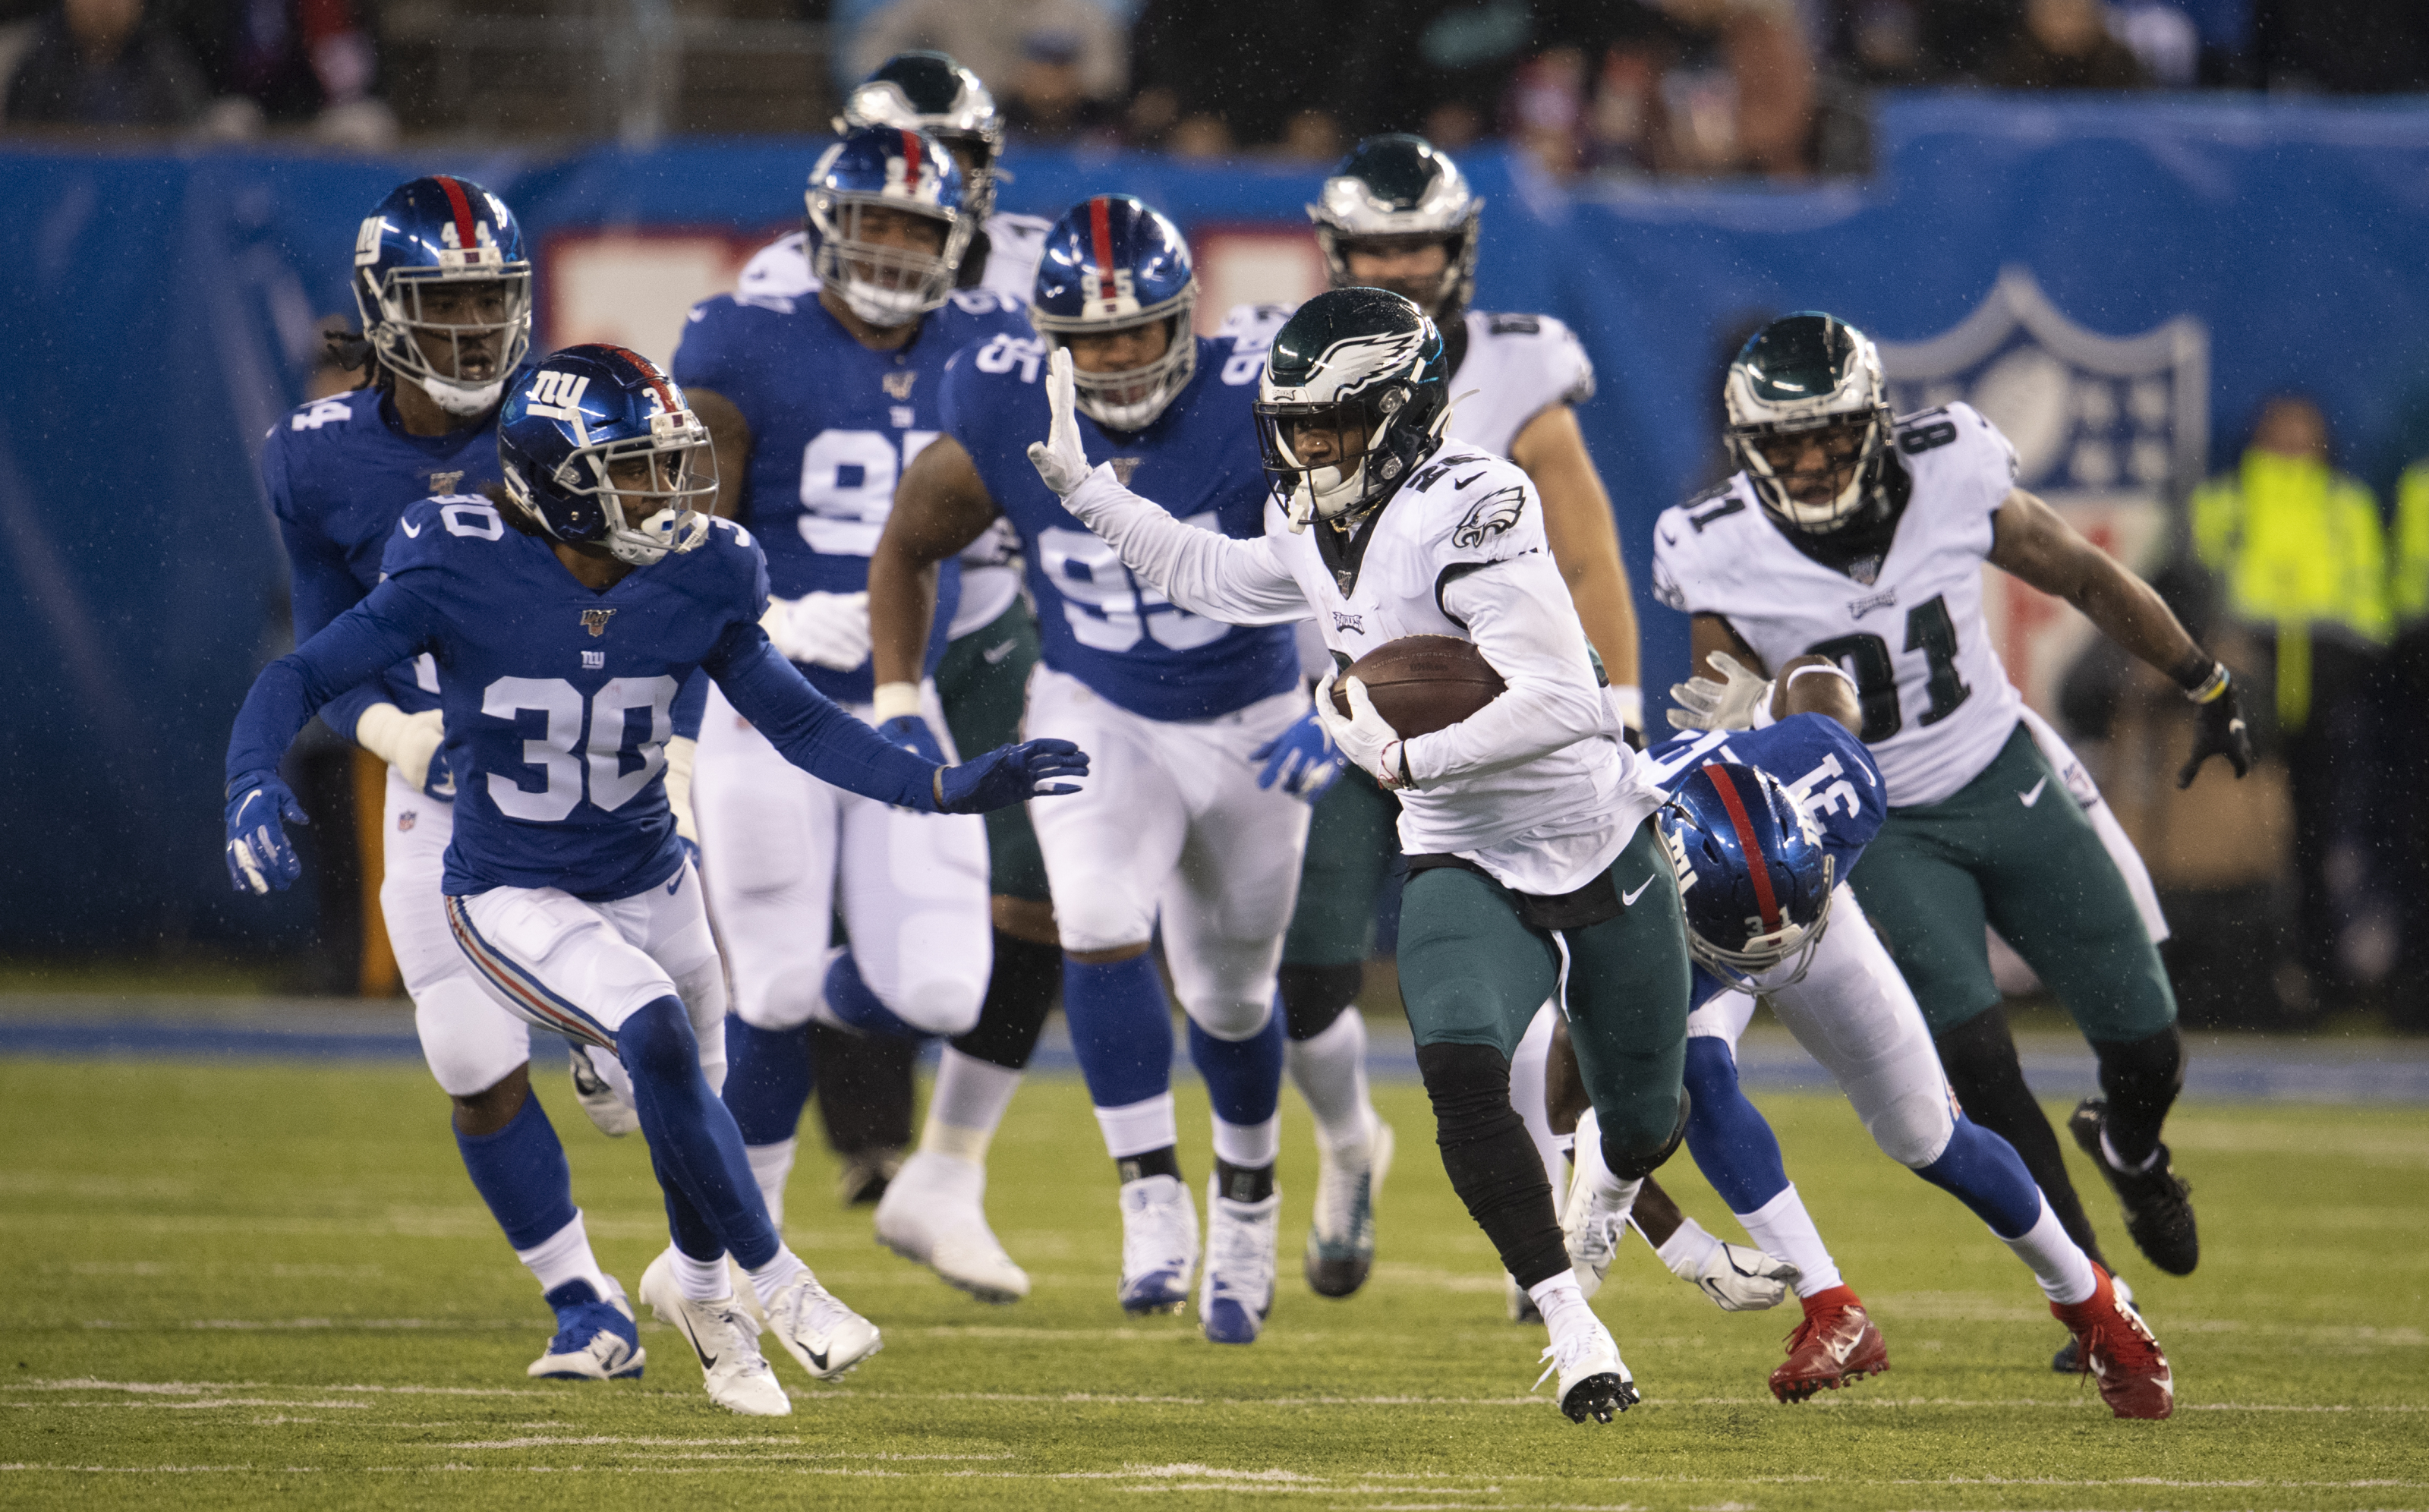 giants against the eagles